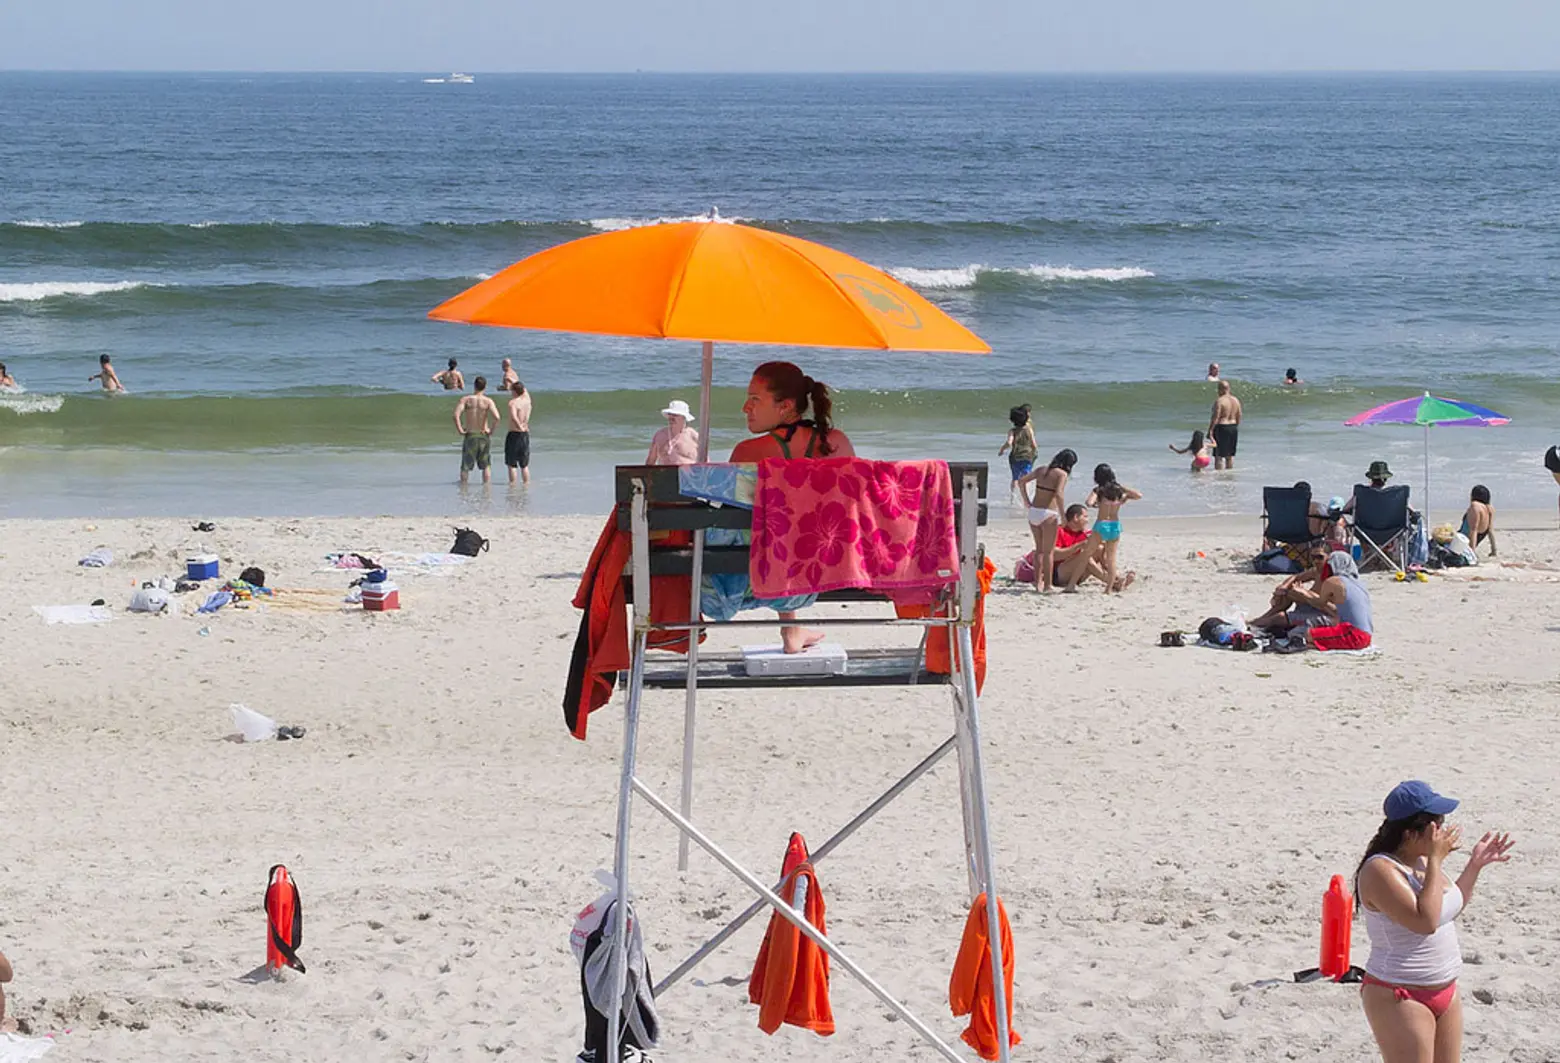 Ahead of Memorial Day Weekend, the city closes 11-block stretch of Rockaway beach